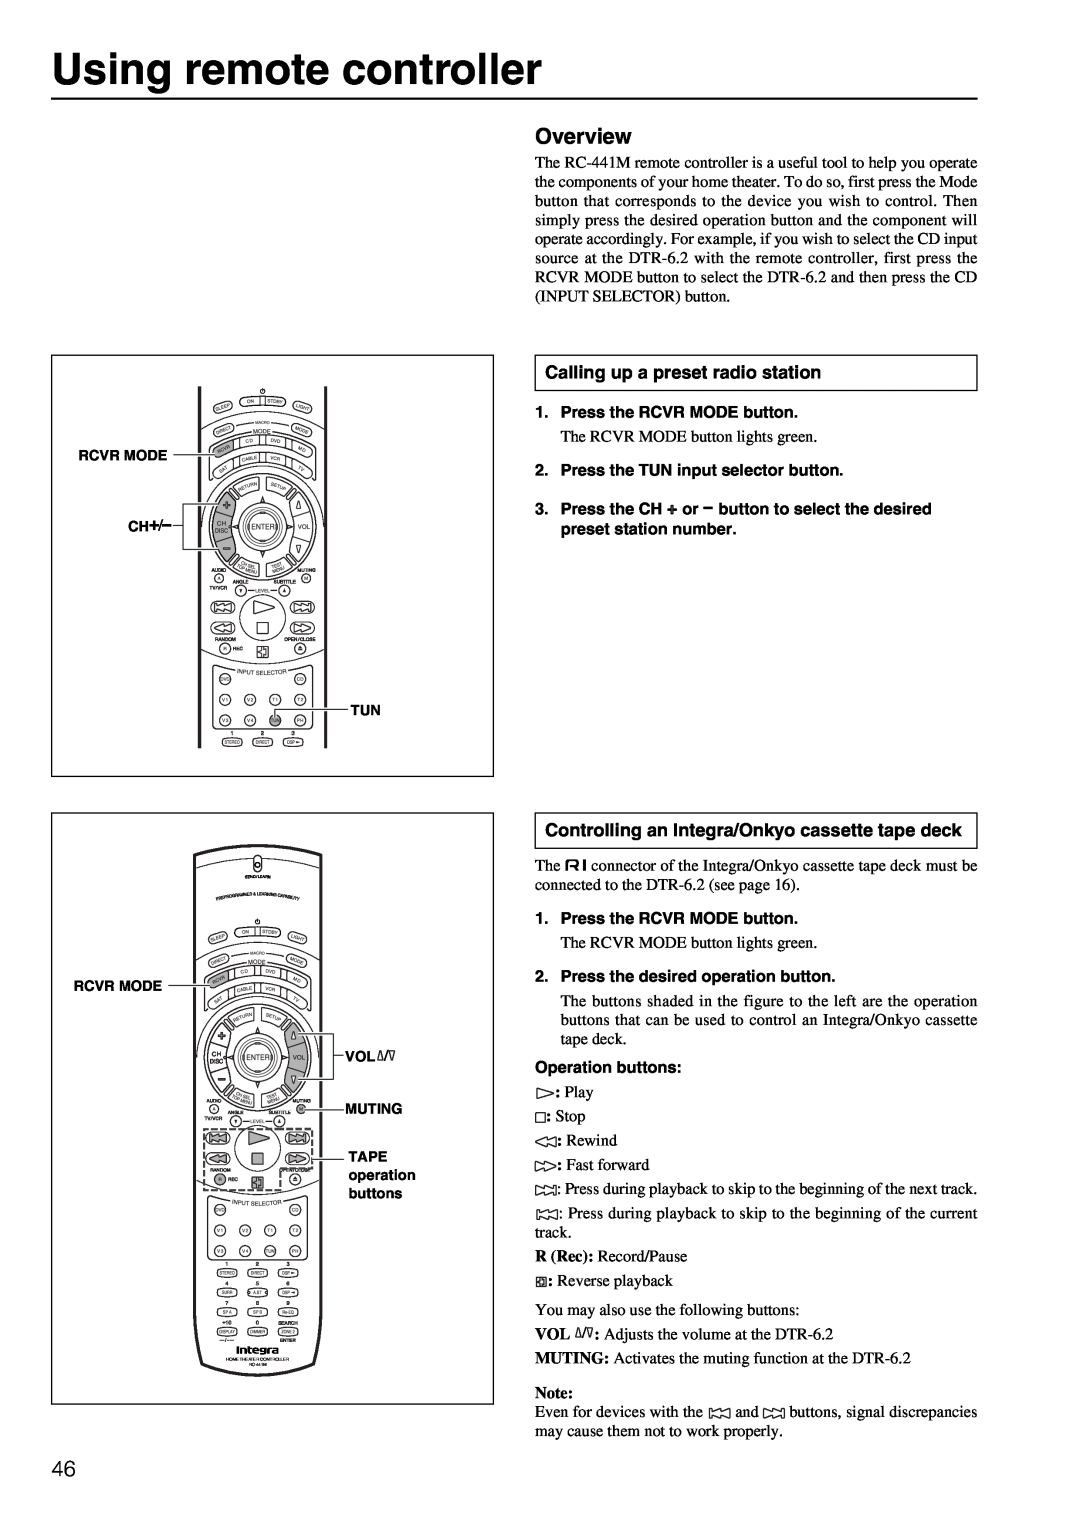 Integra DTR-6.2 instruction manual Using remote controller, Overview, Calling up a preset radio station 